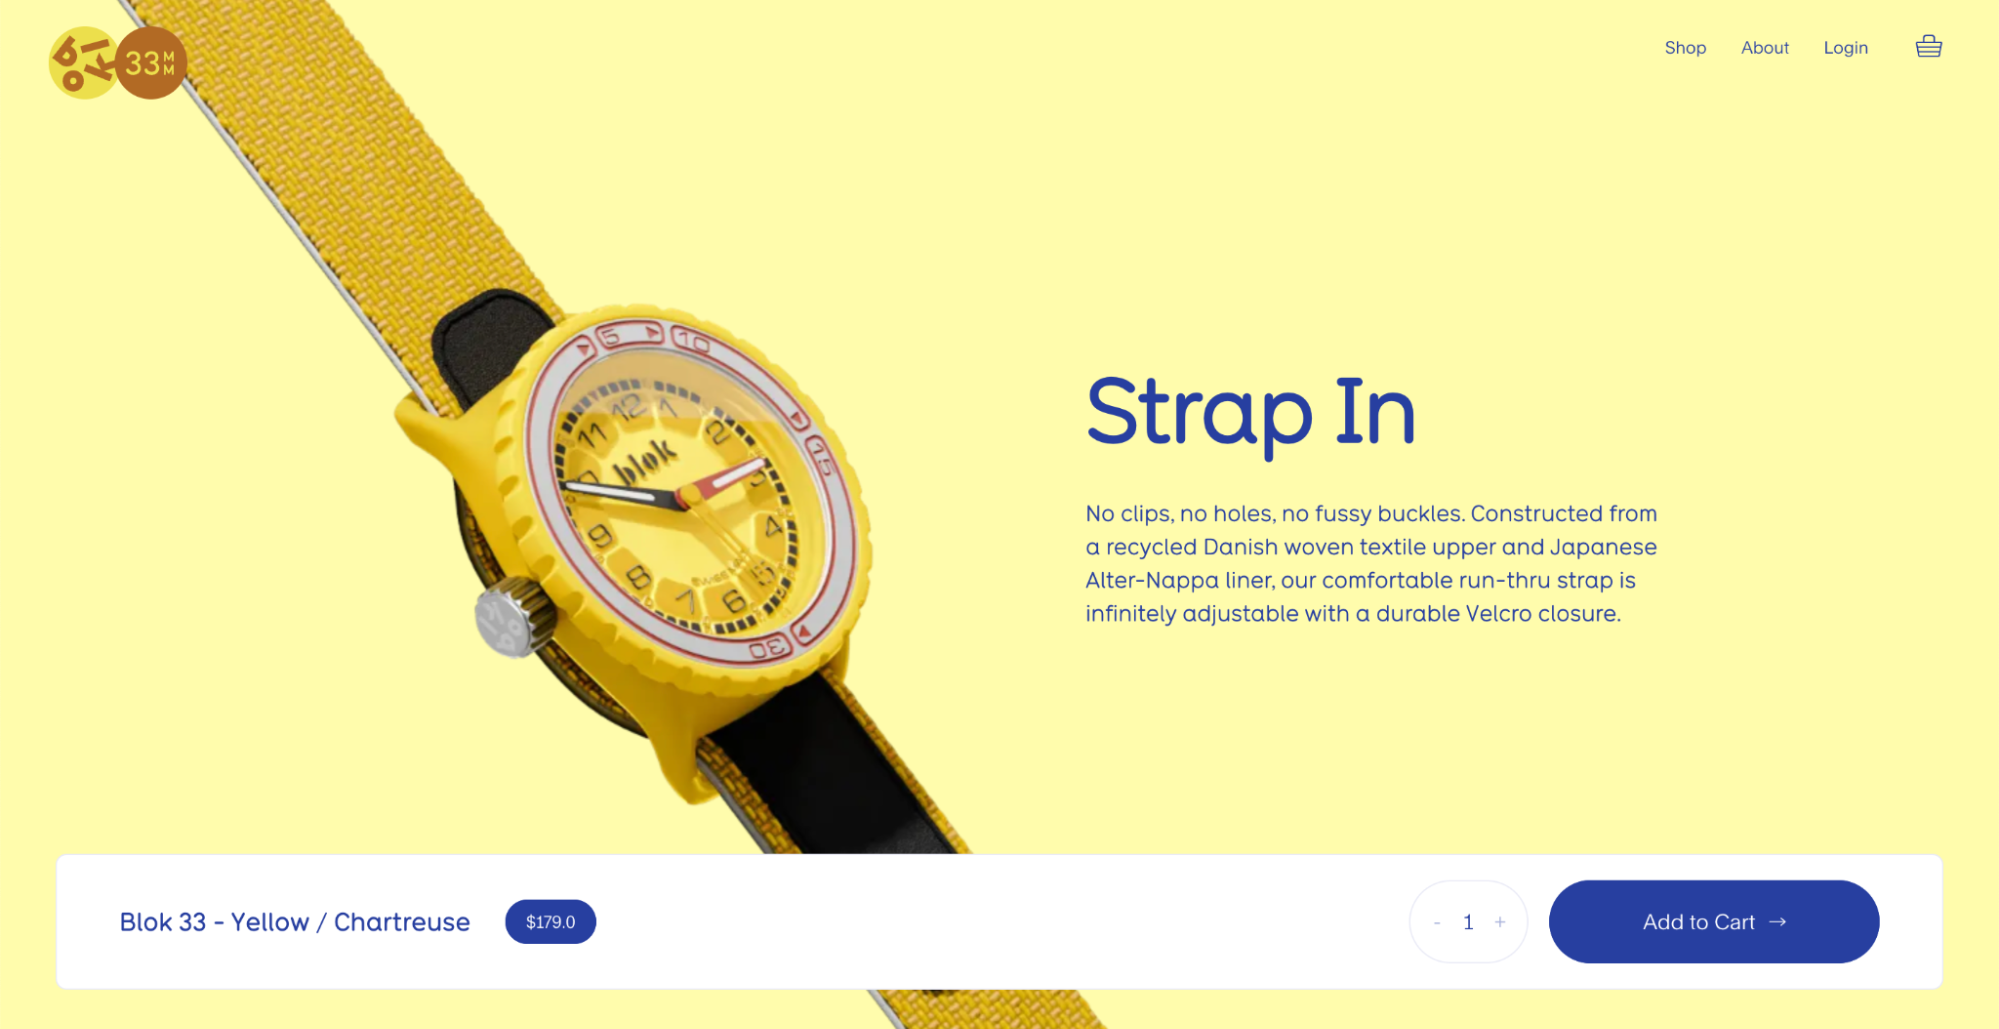 Blok Watches ecommerce experience